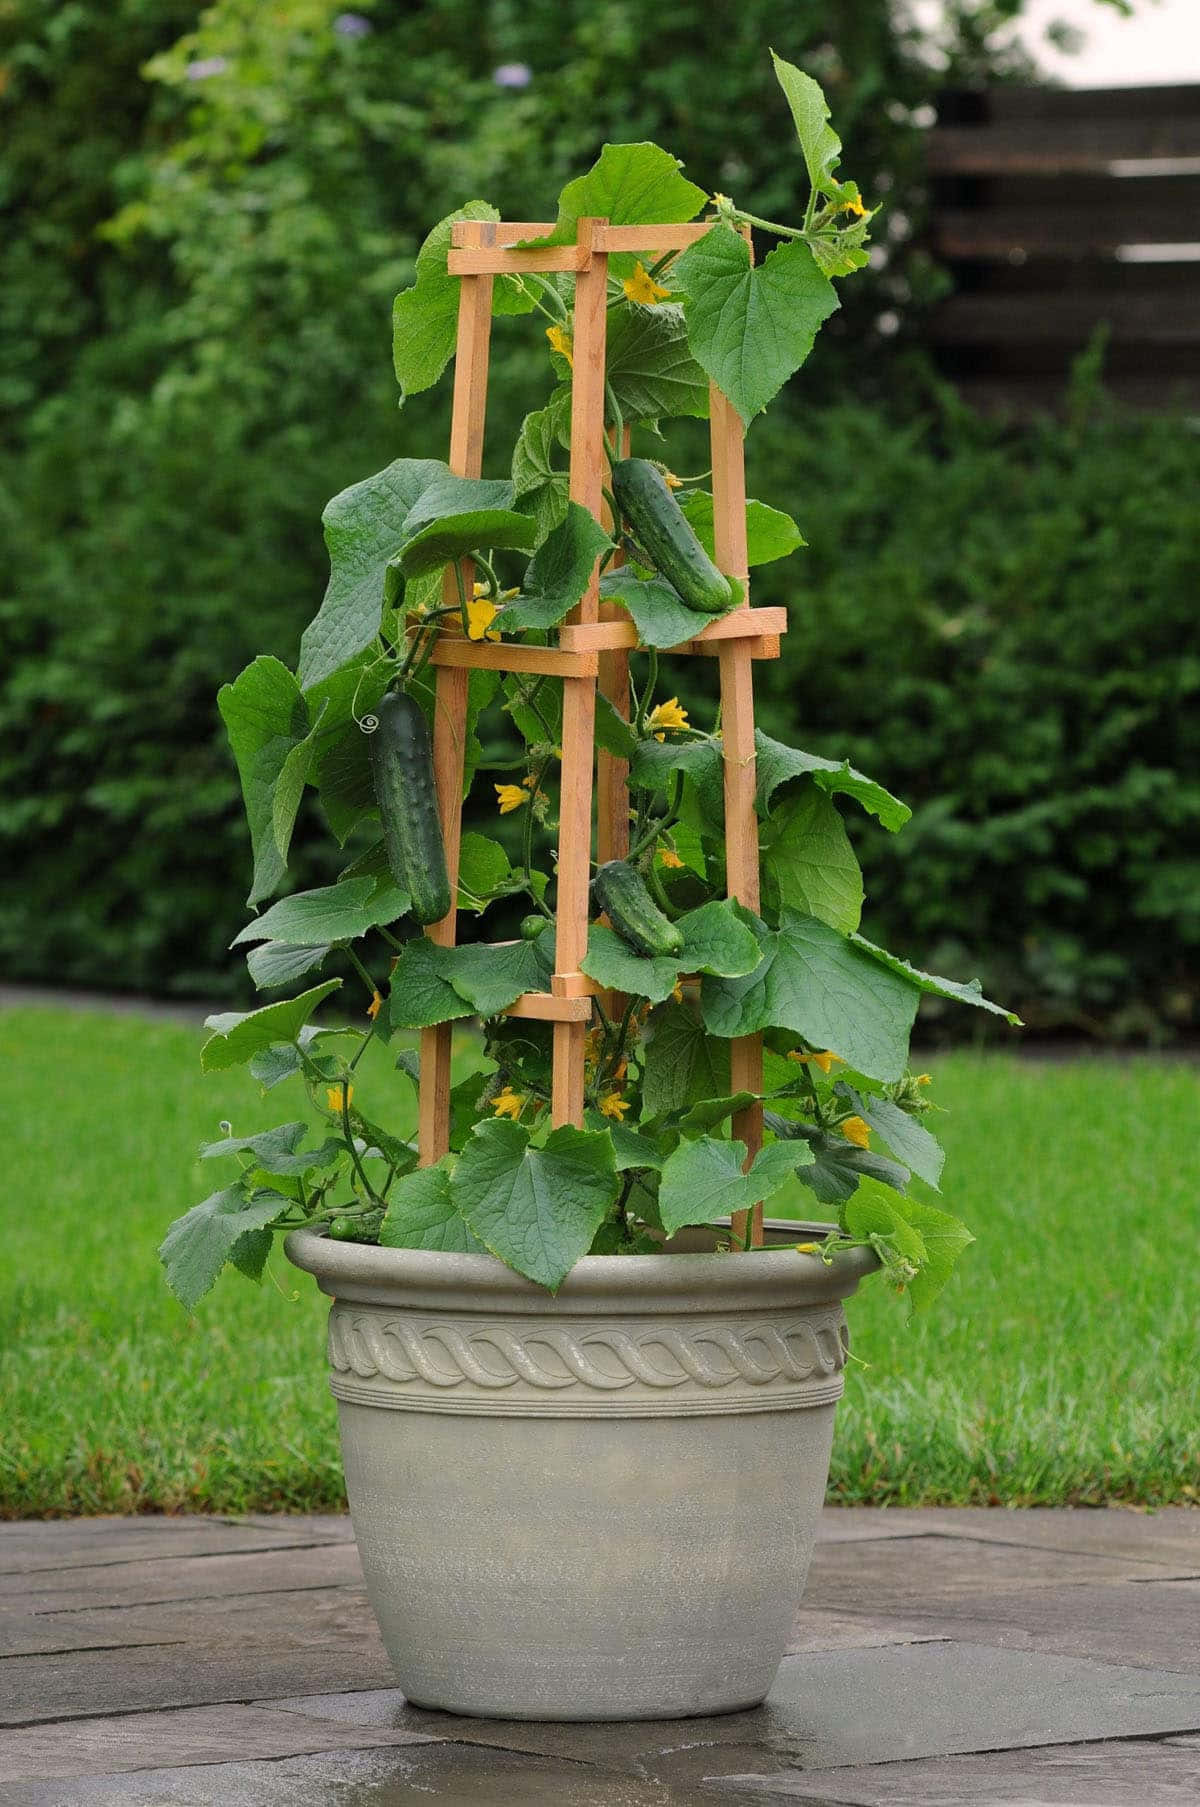 A Wooden Planter With Cucumbers In It